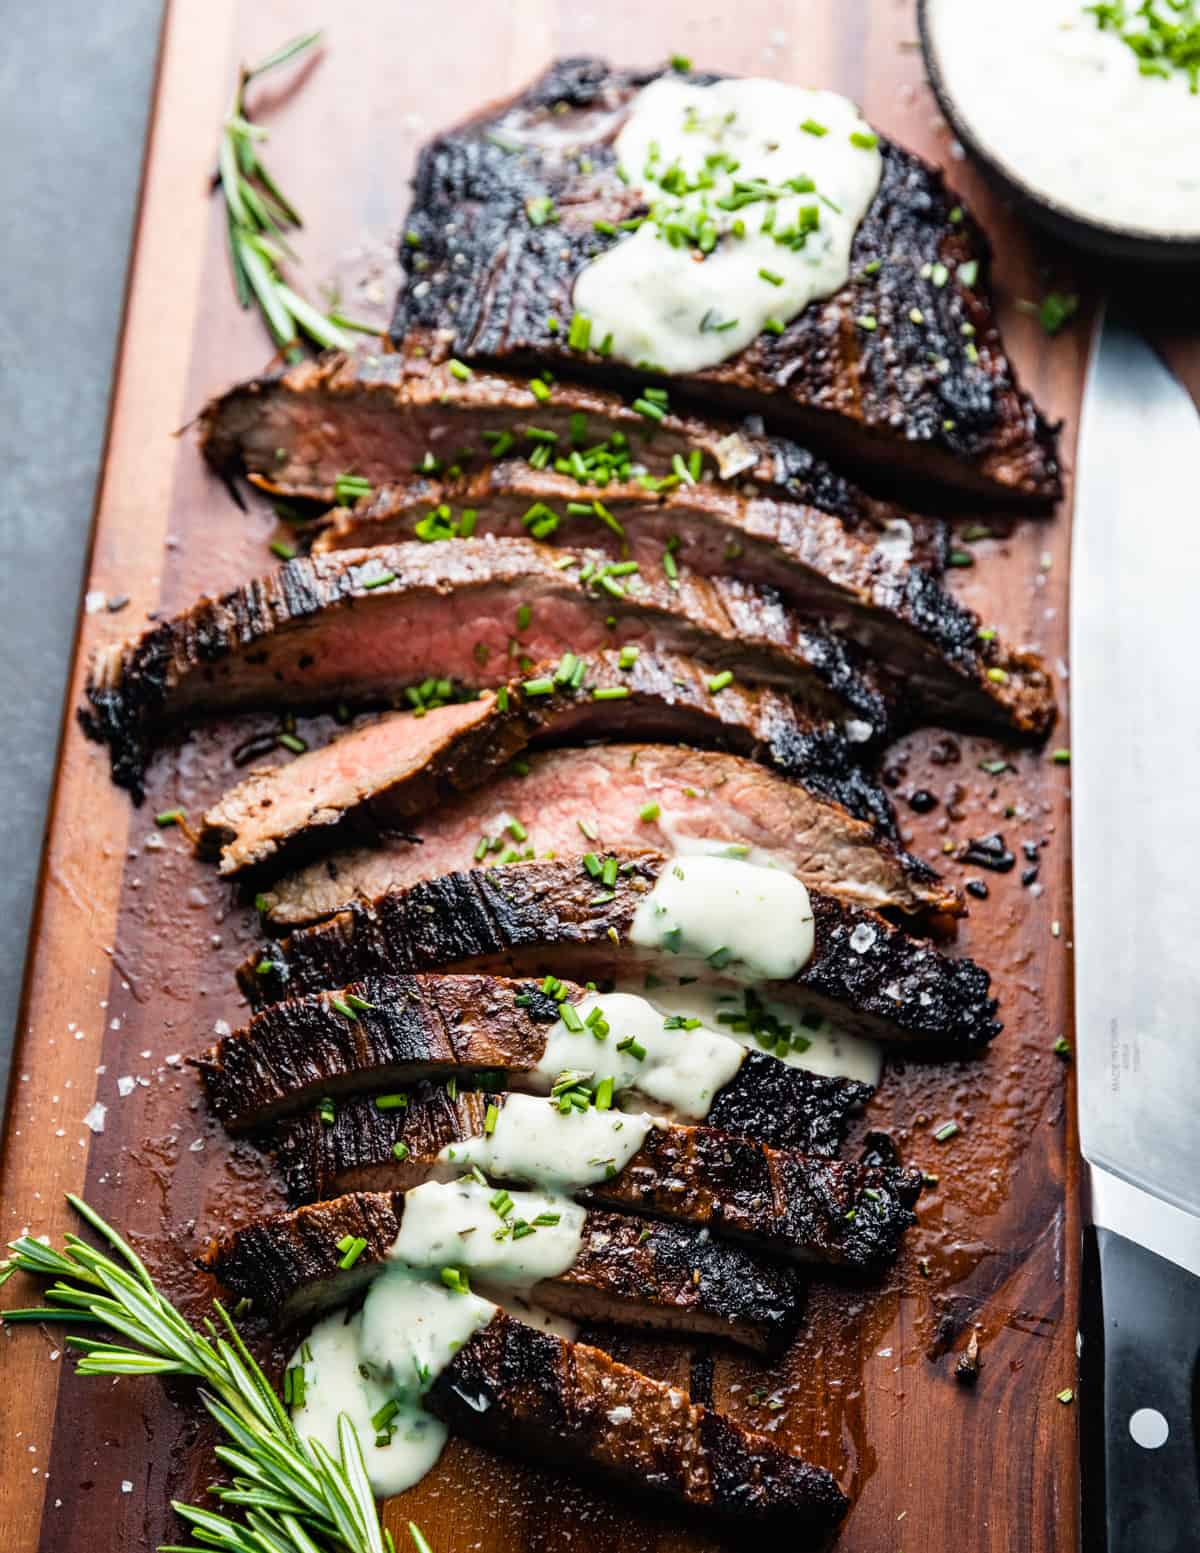 Well seared and sliced steak on a wooden cutting board. There is white sauce napped over the top in a stripe and green herbs garnishing.